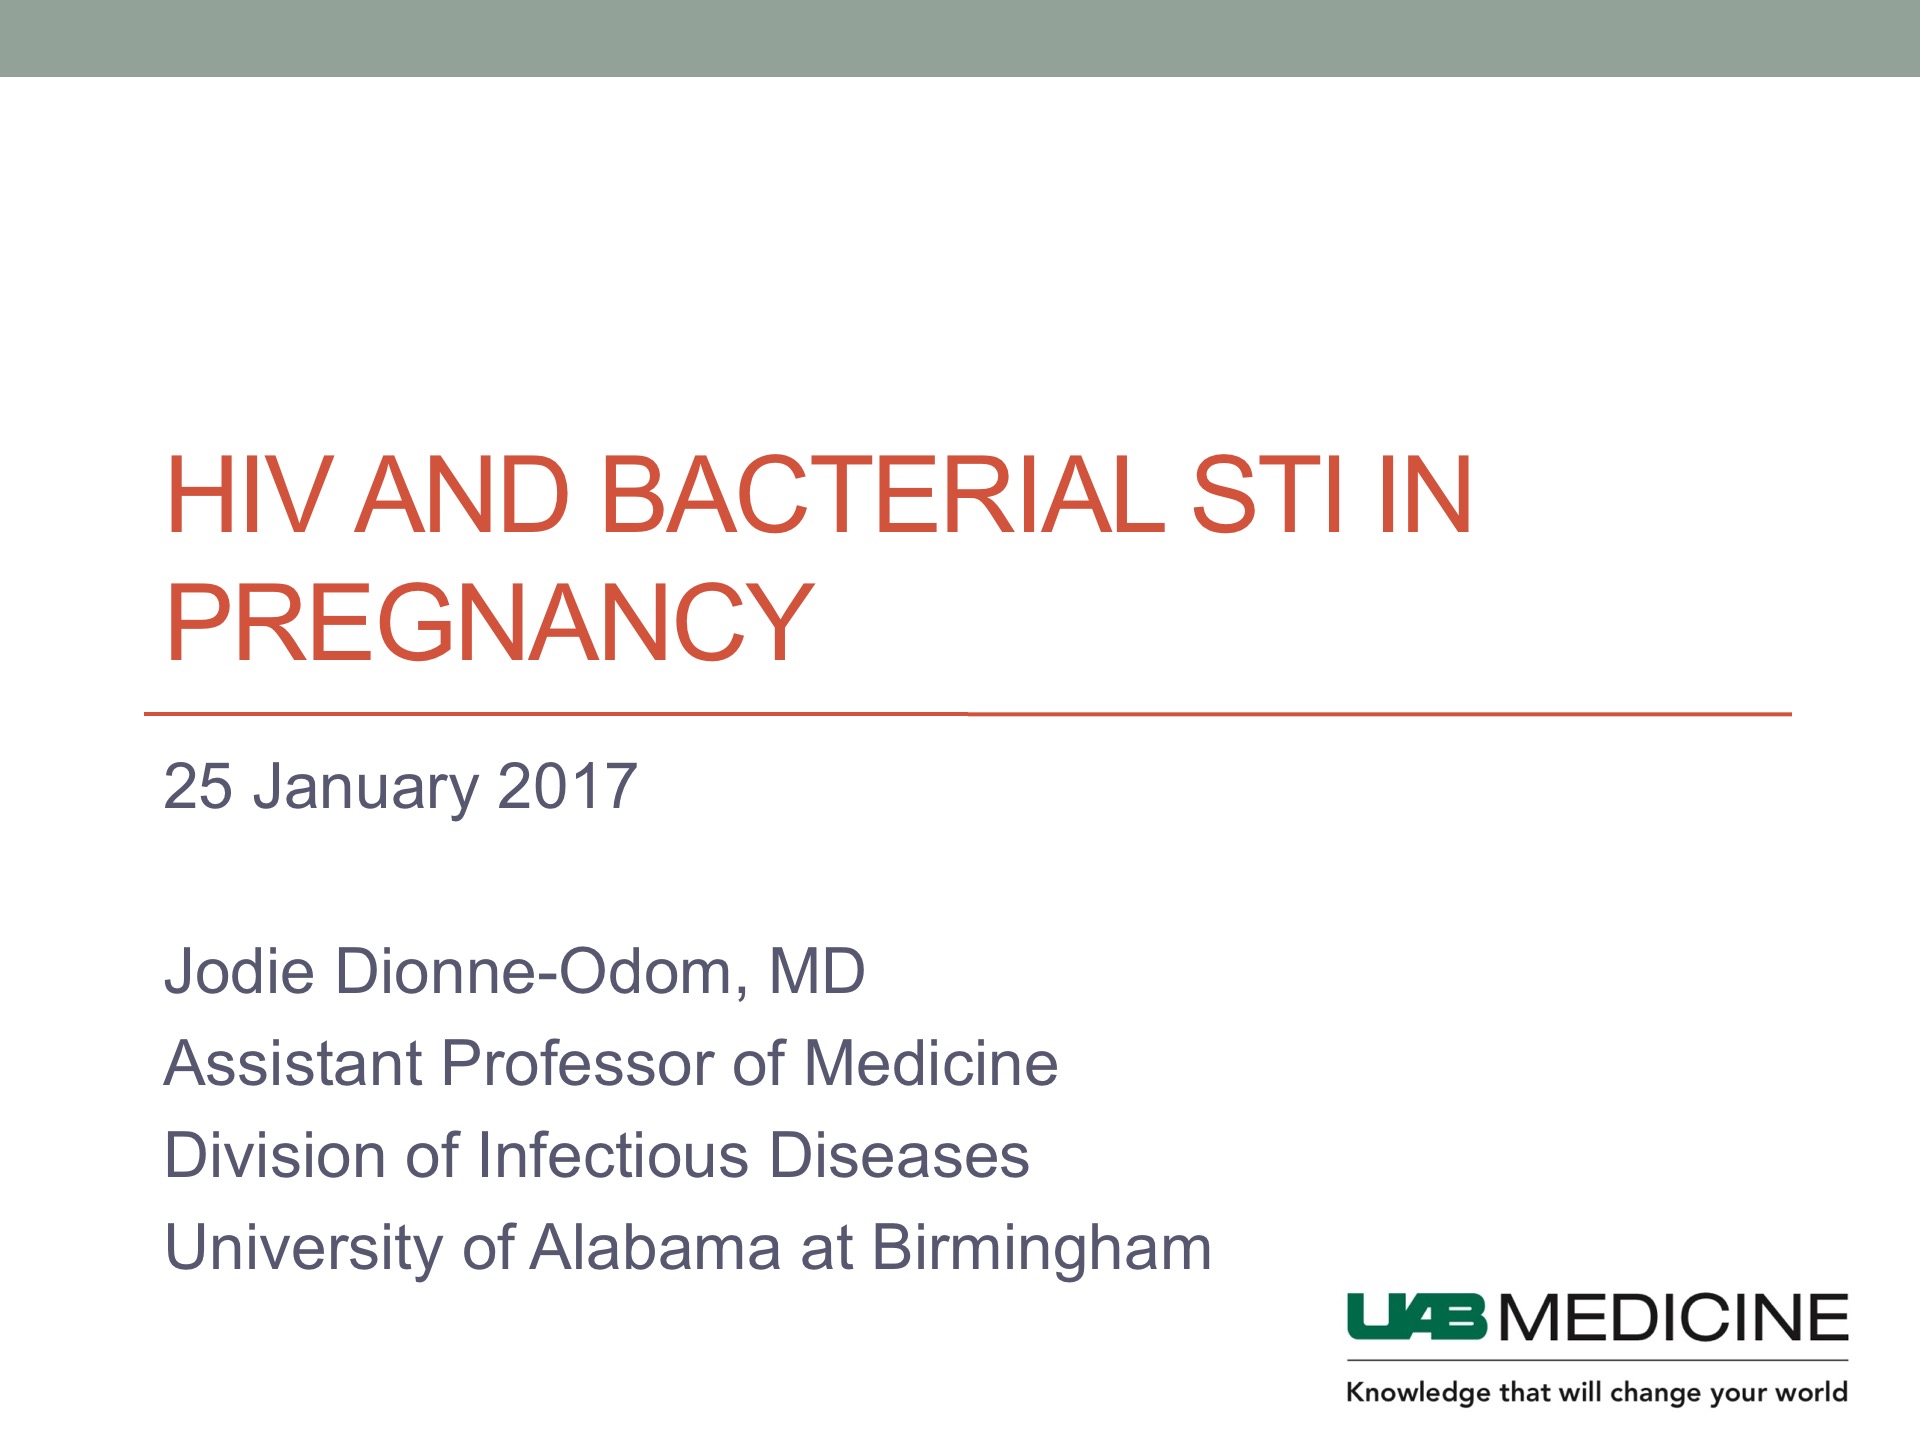 HIV and Bacterial STI in Pregnancy